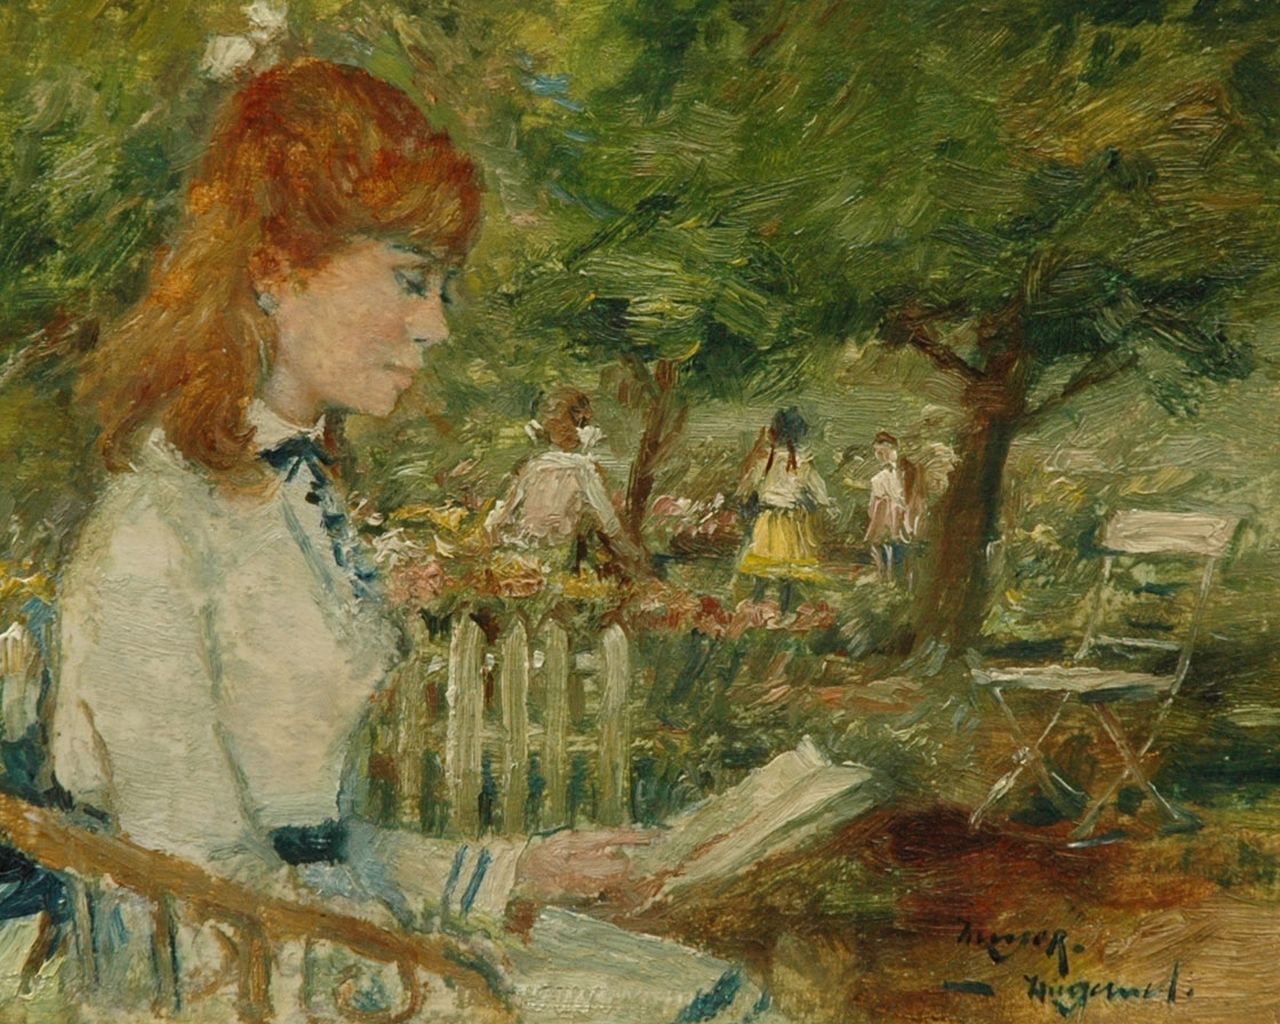 Meyer-Wiegand R.D.  | Rolf Dieter Meyer-Wiegand, Reading girl in a public garden, oil on canvas laid down on panel 12.7 x 15.8 cm, signed l.r.